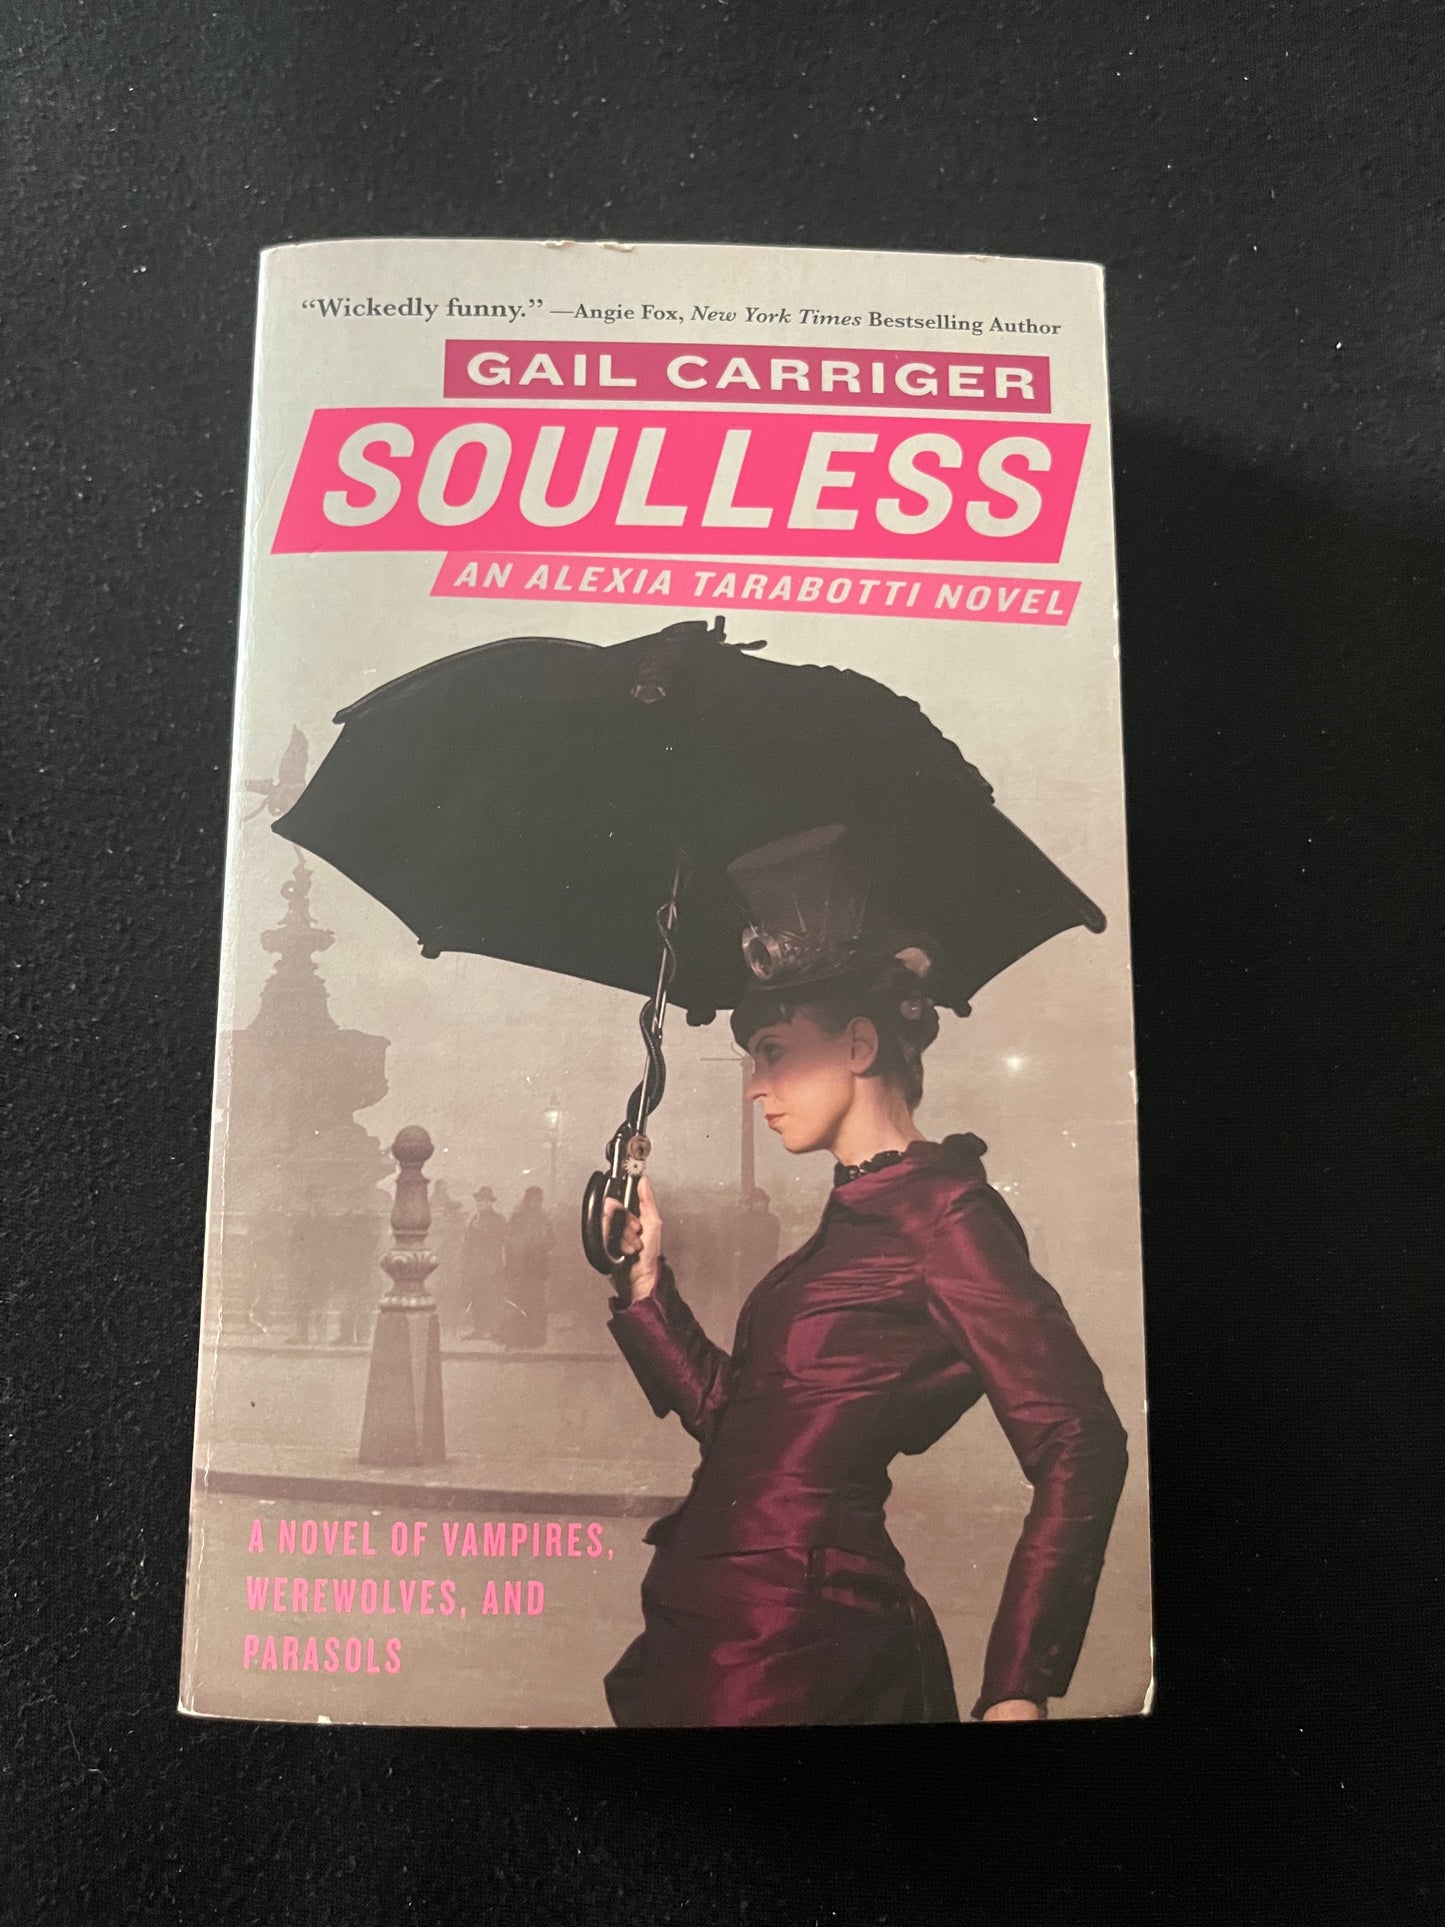 SOULLESS by Gail Carriger